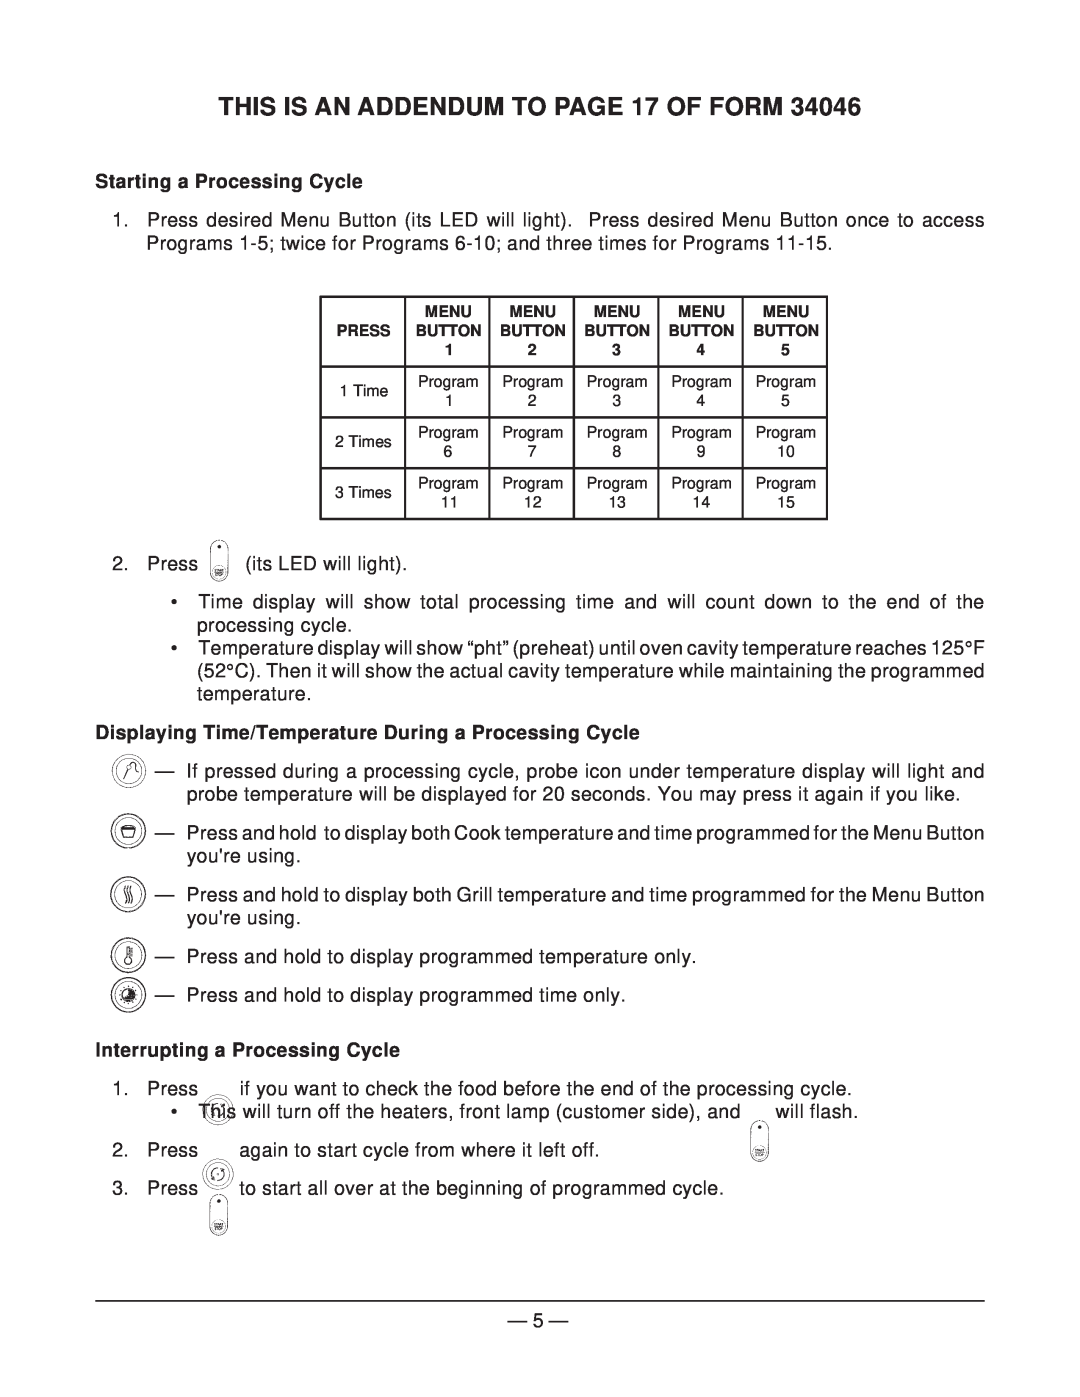 Hobart HR5 THIS IS AN ADDENDUM TO PAGE 17 OF FORM, Starting a Processing Cycle, Interrupting a Processing Cycle 